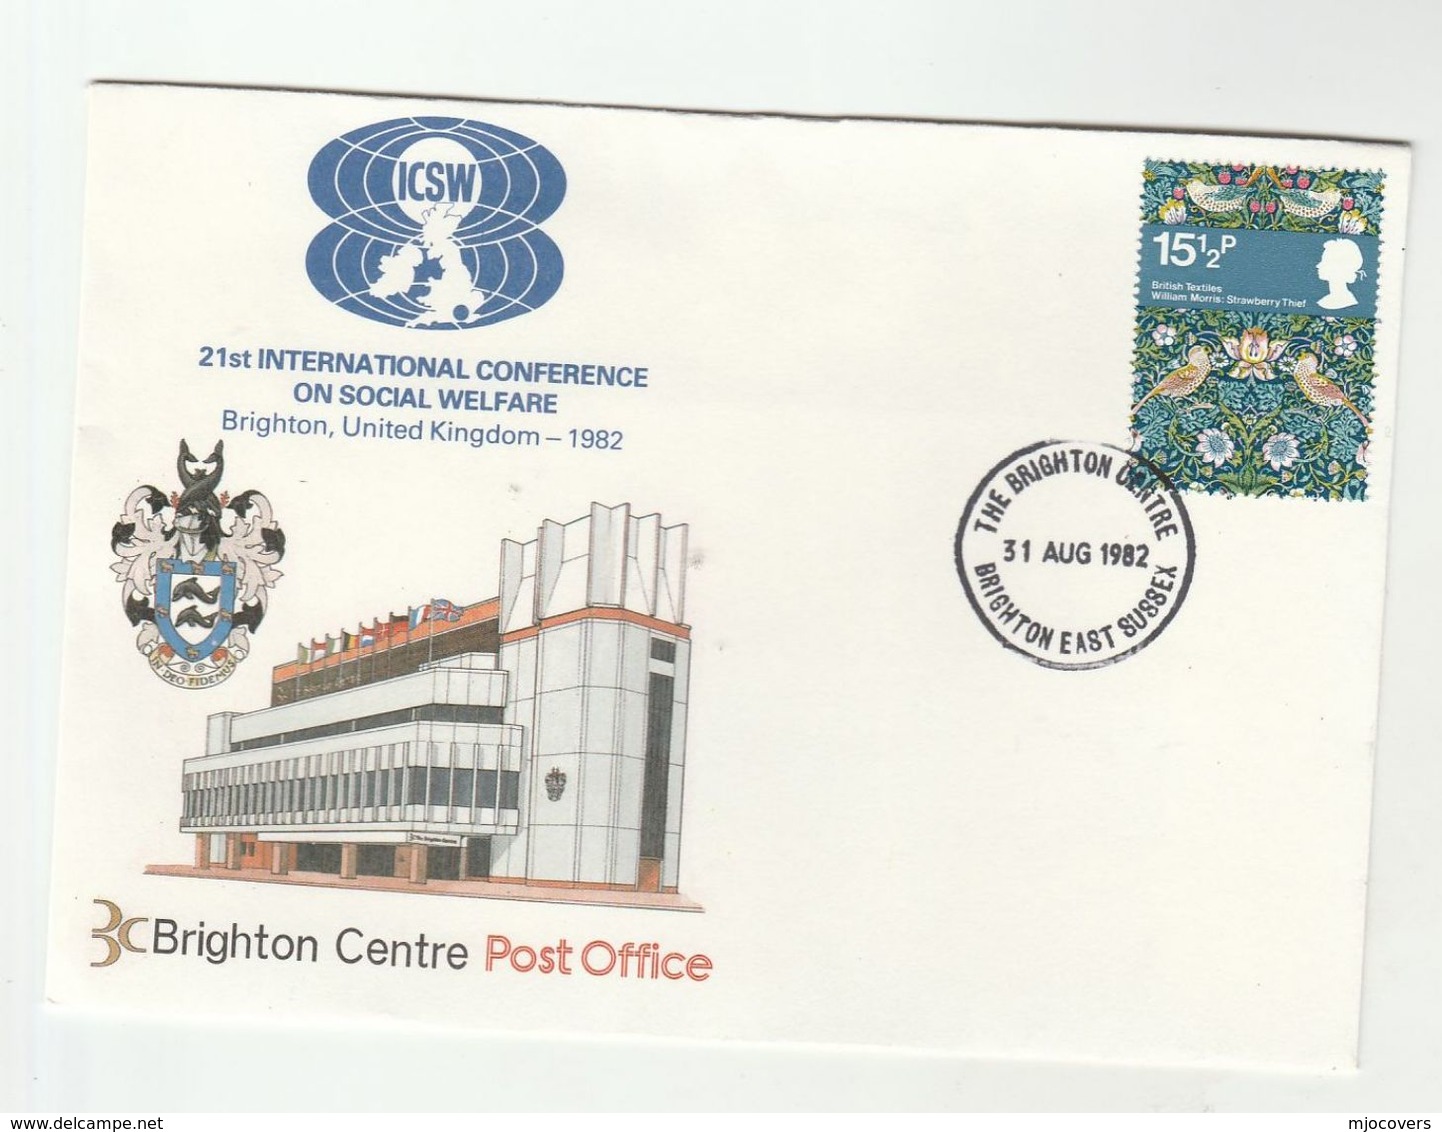 1982 BRIGHTON SOCIAL WELFARE CONFERENCE Event COVER Illus  DOLPHIN Coat Of Arms Gb Stamps - Covers